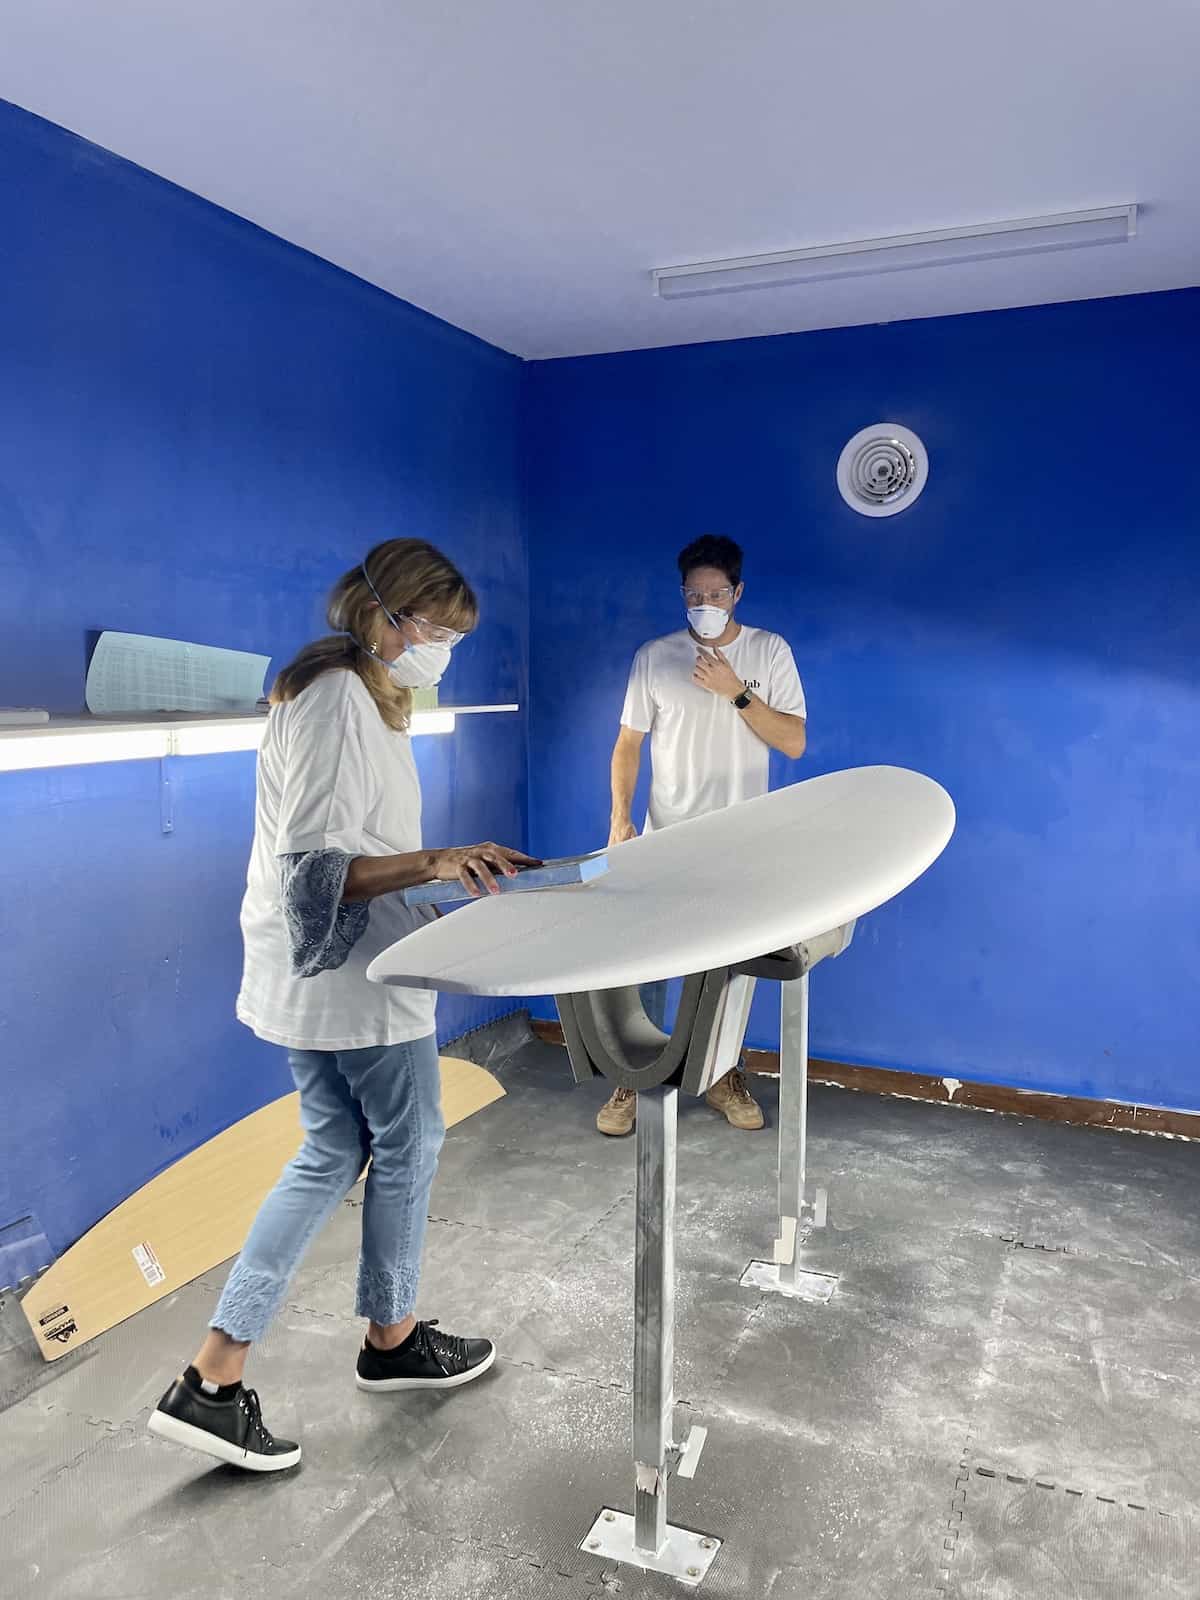 Man and woman making a surfboard.